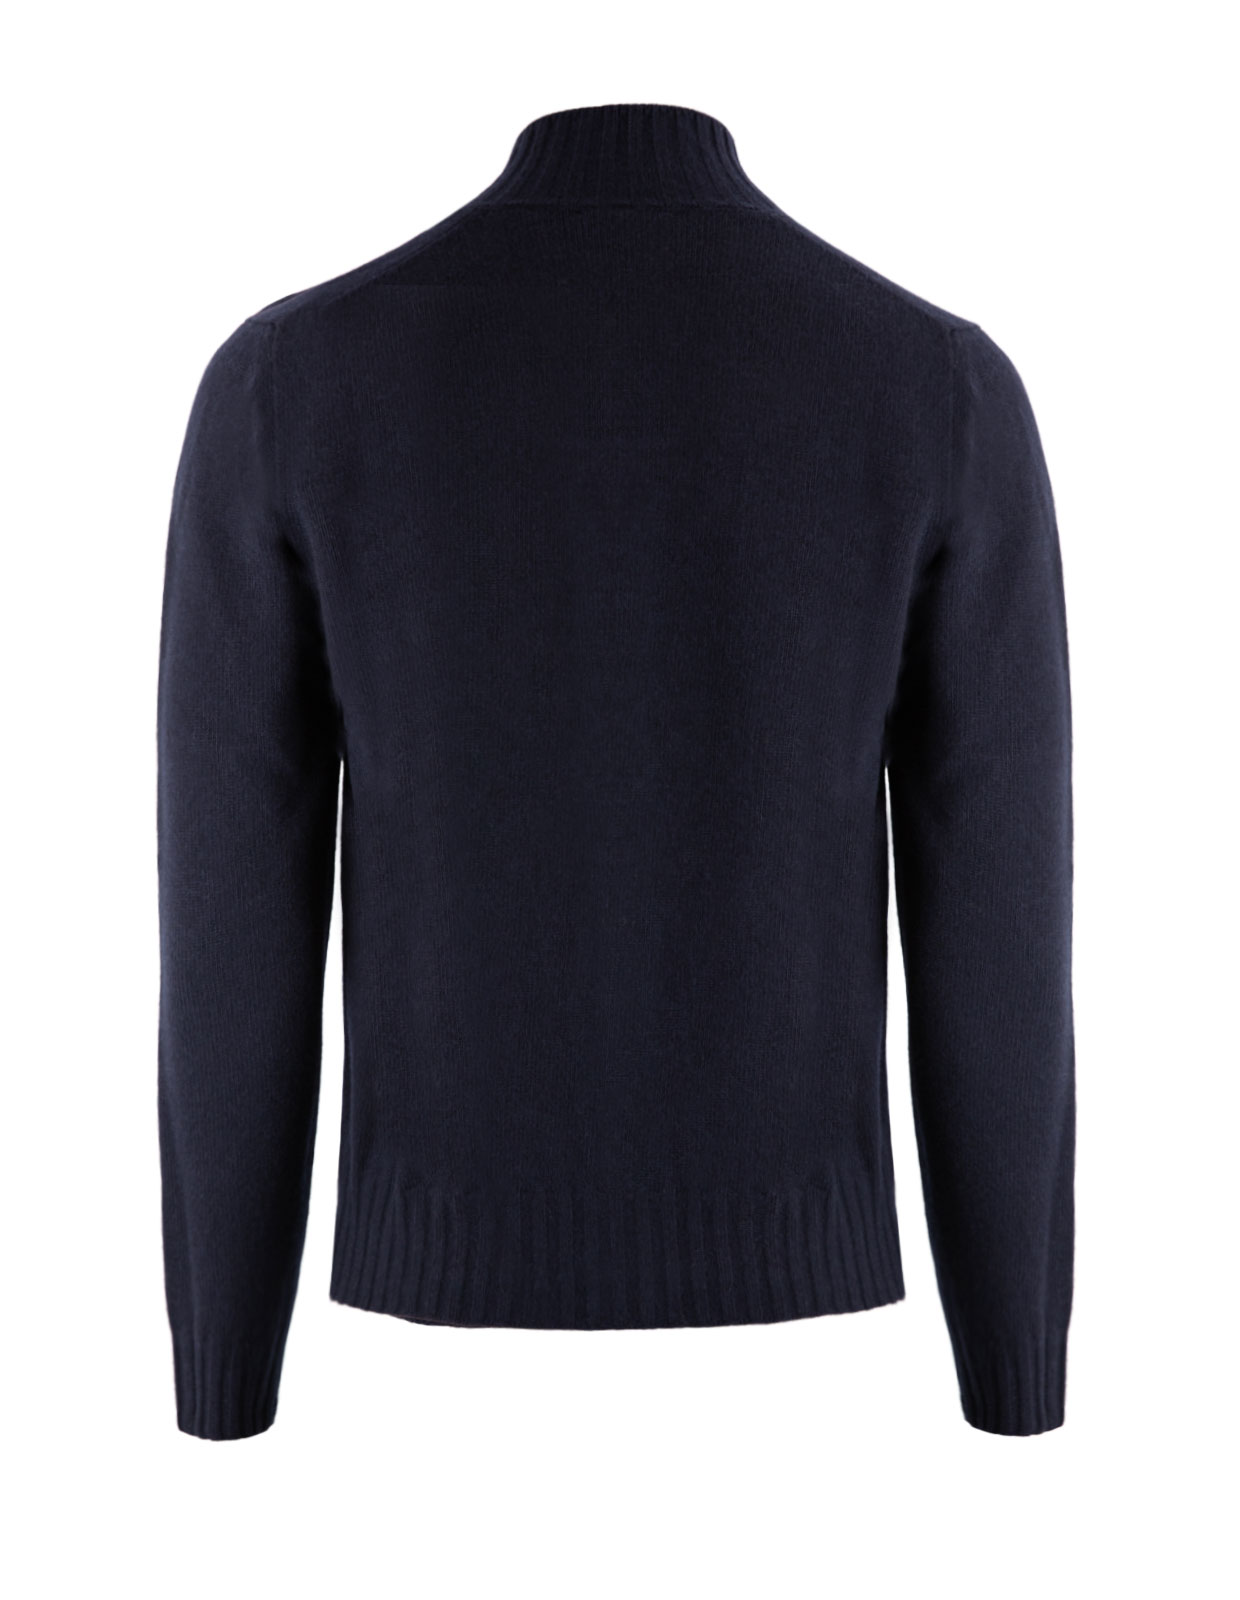 Full Zip Wool Cashmere Notte